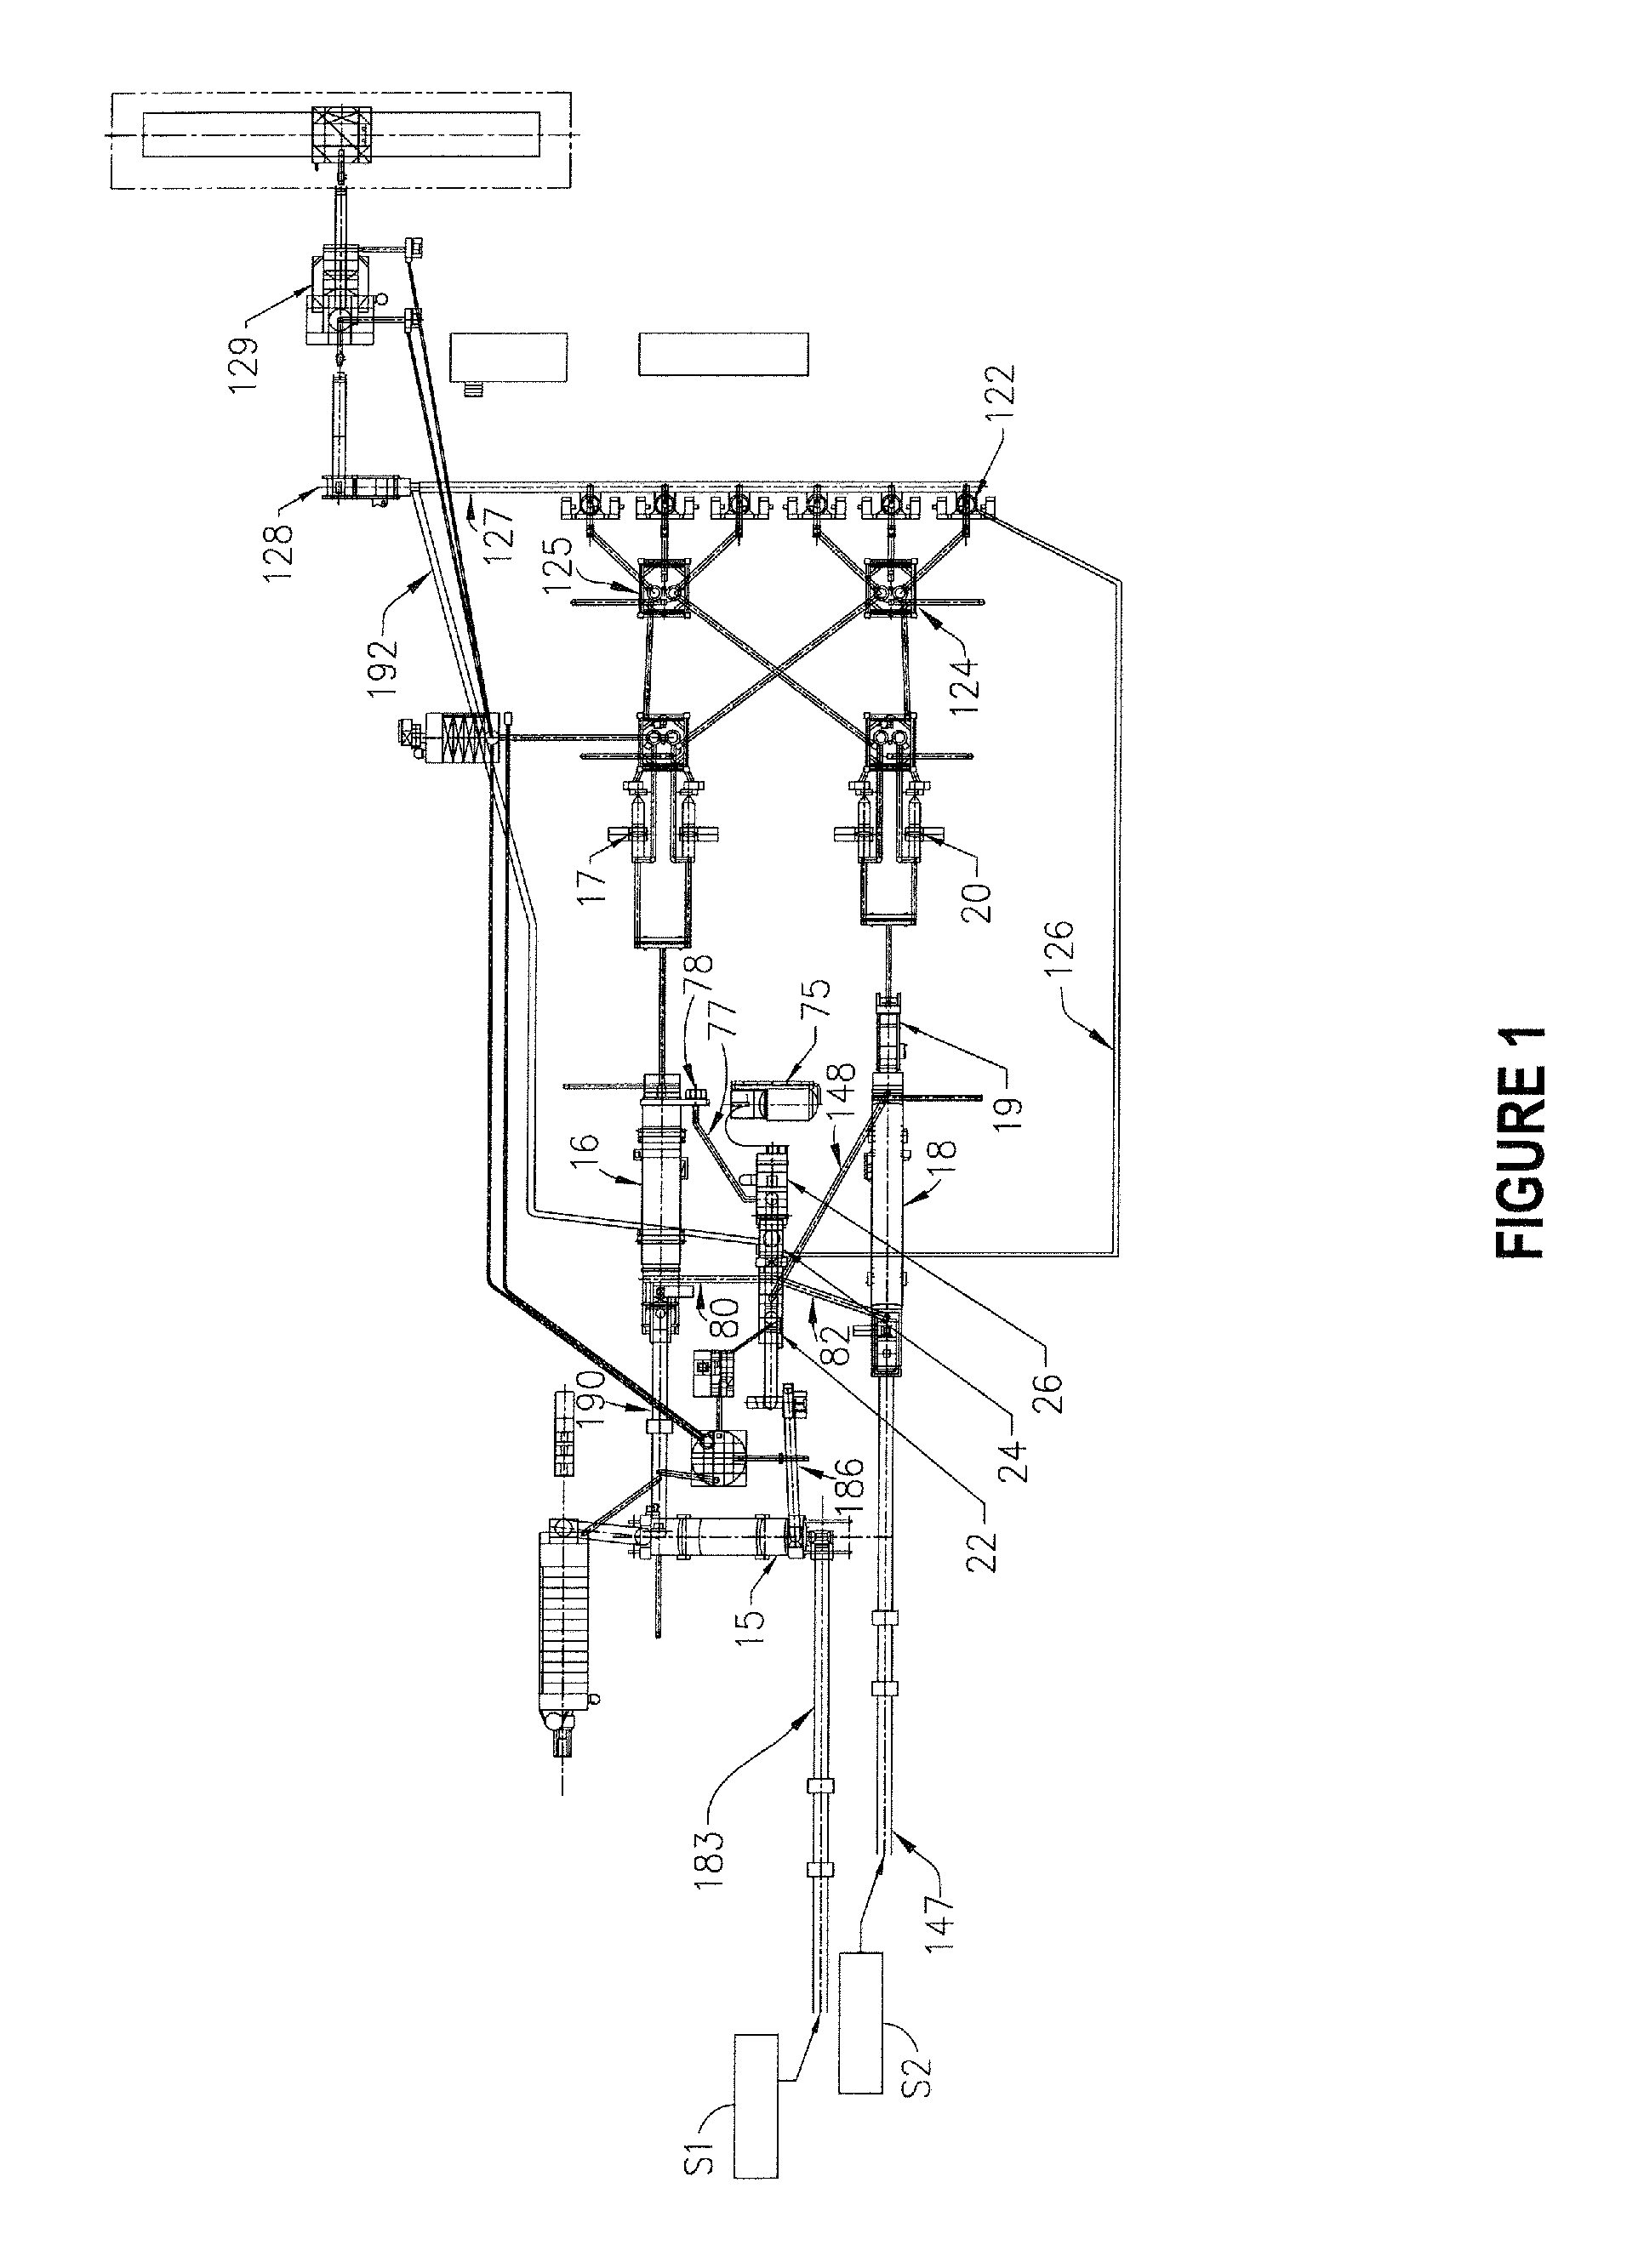 Method And Apparatus For Pelletizing Blends Of Biomass Materials For Use As Fuel